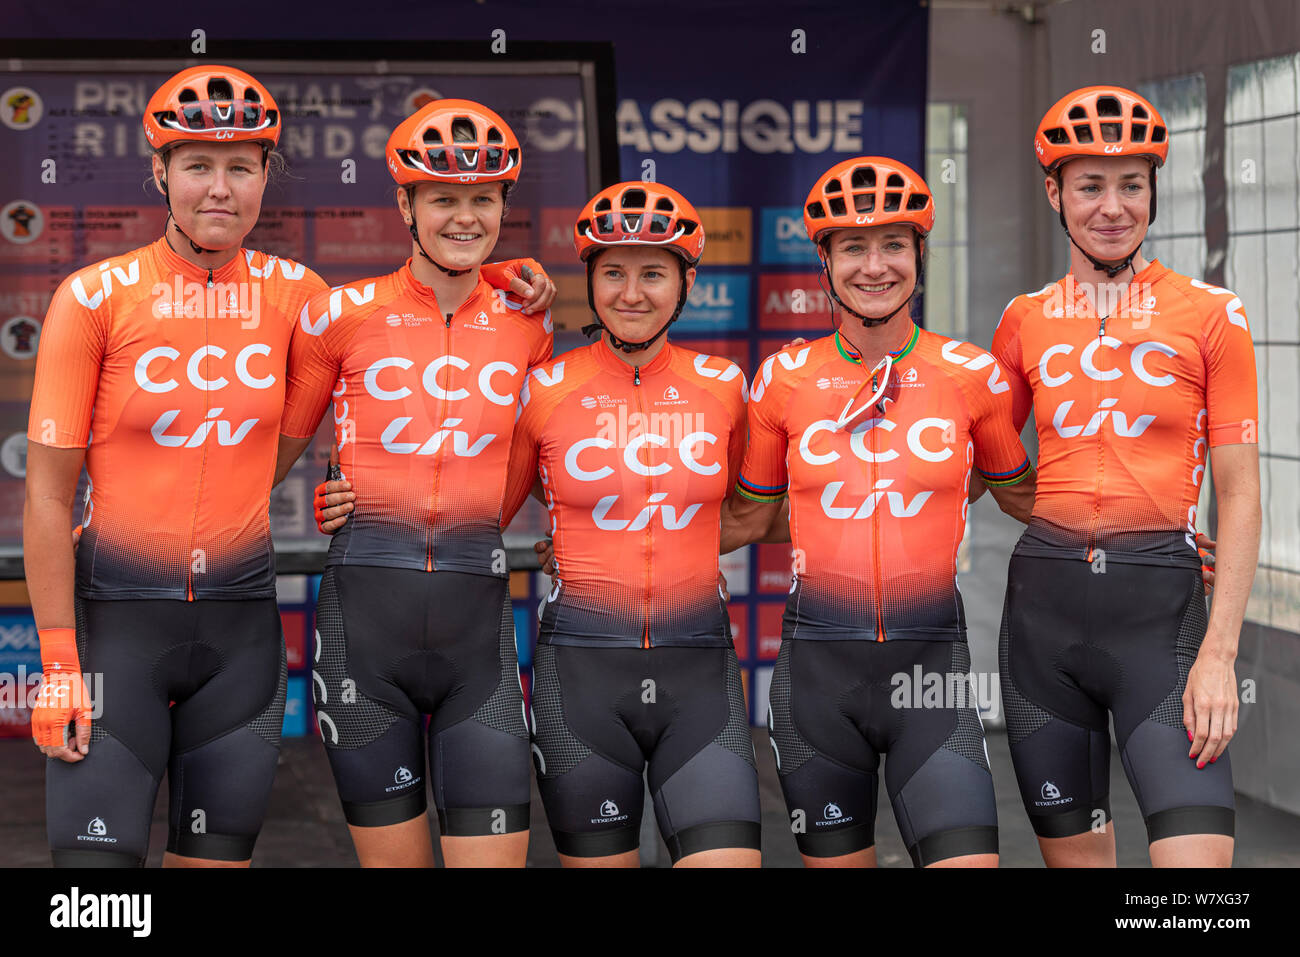 Evy Kuijpers, Jeanne Korevaar, Valerie Demey, Marianne Vos, Riejanne Markus of CCC Liv before racing in the Prudential RideLondon Classique cycle race Stock Photo